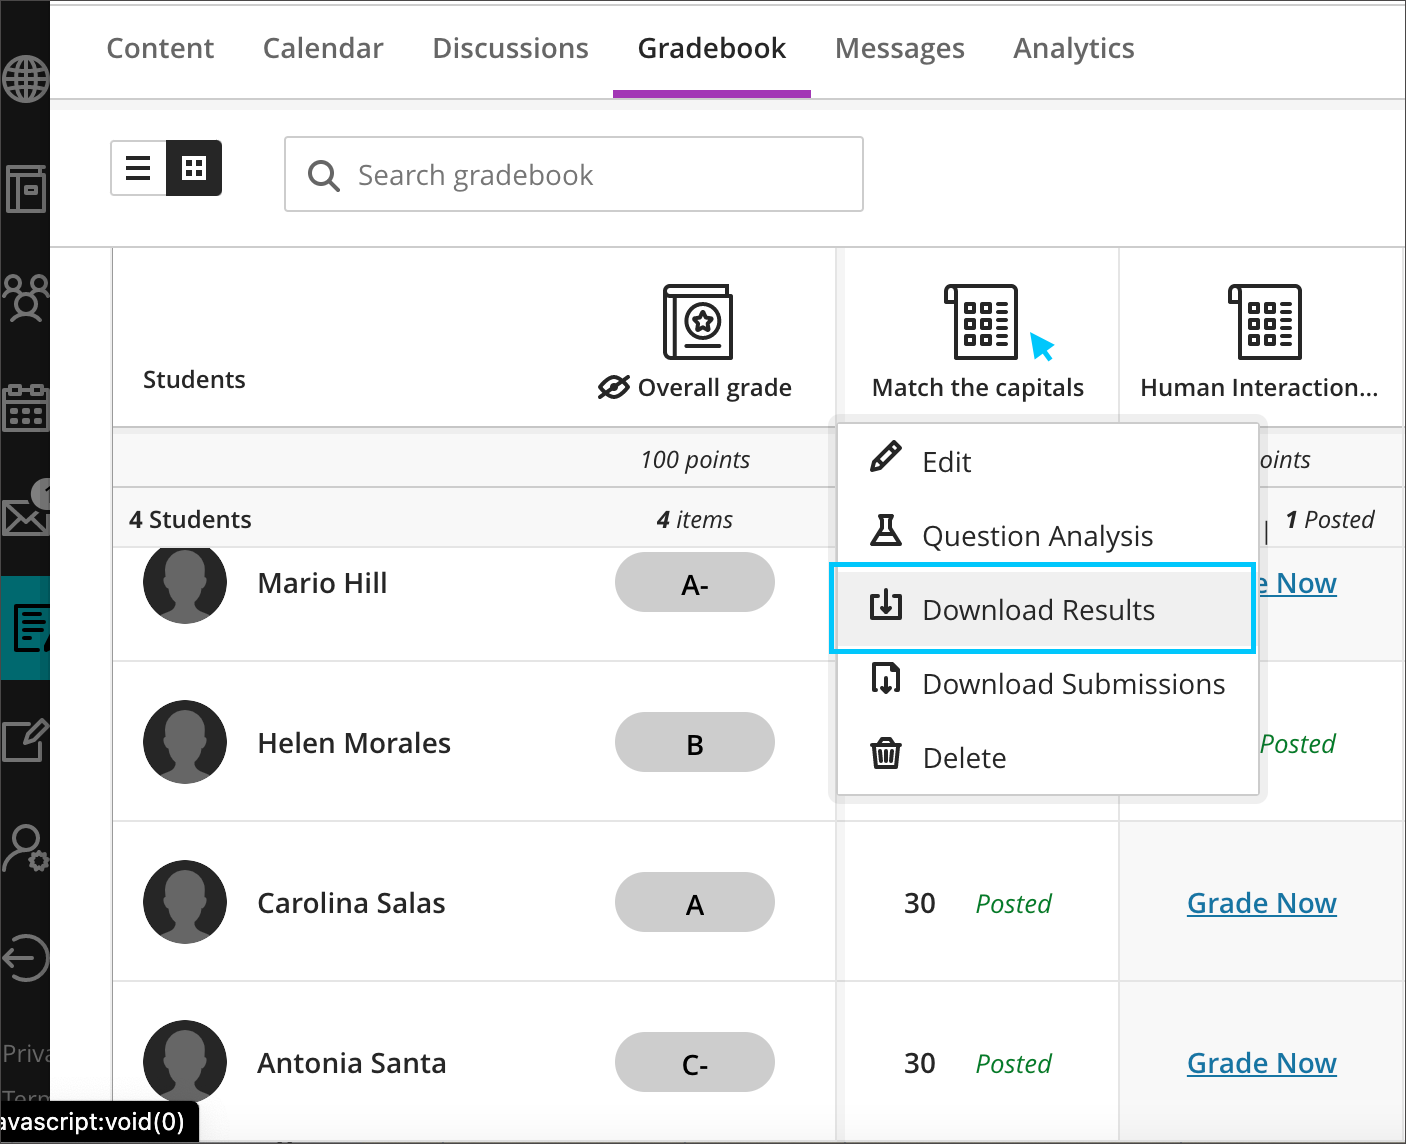 Download Assessment Results option from Gradebook grid view.